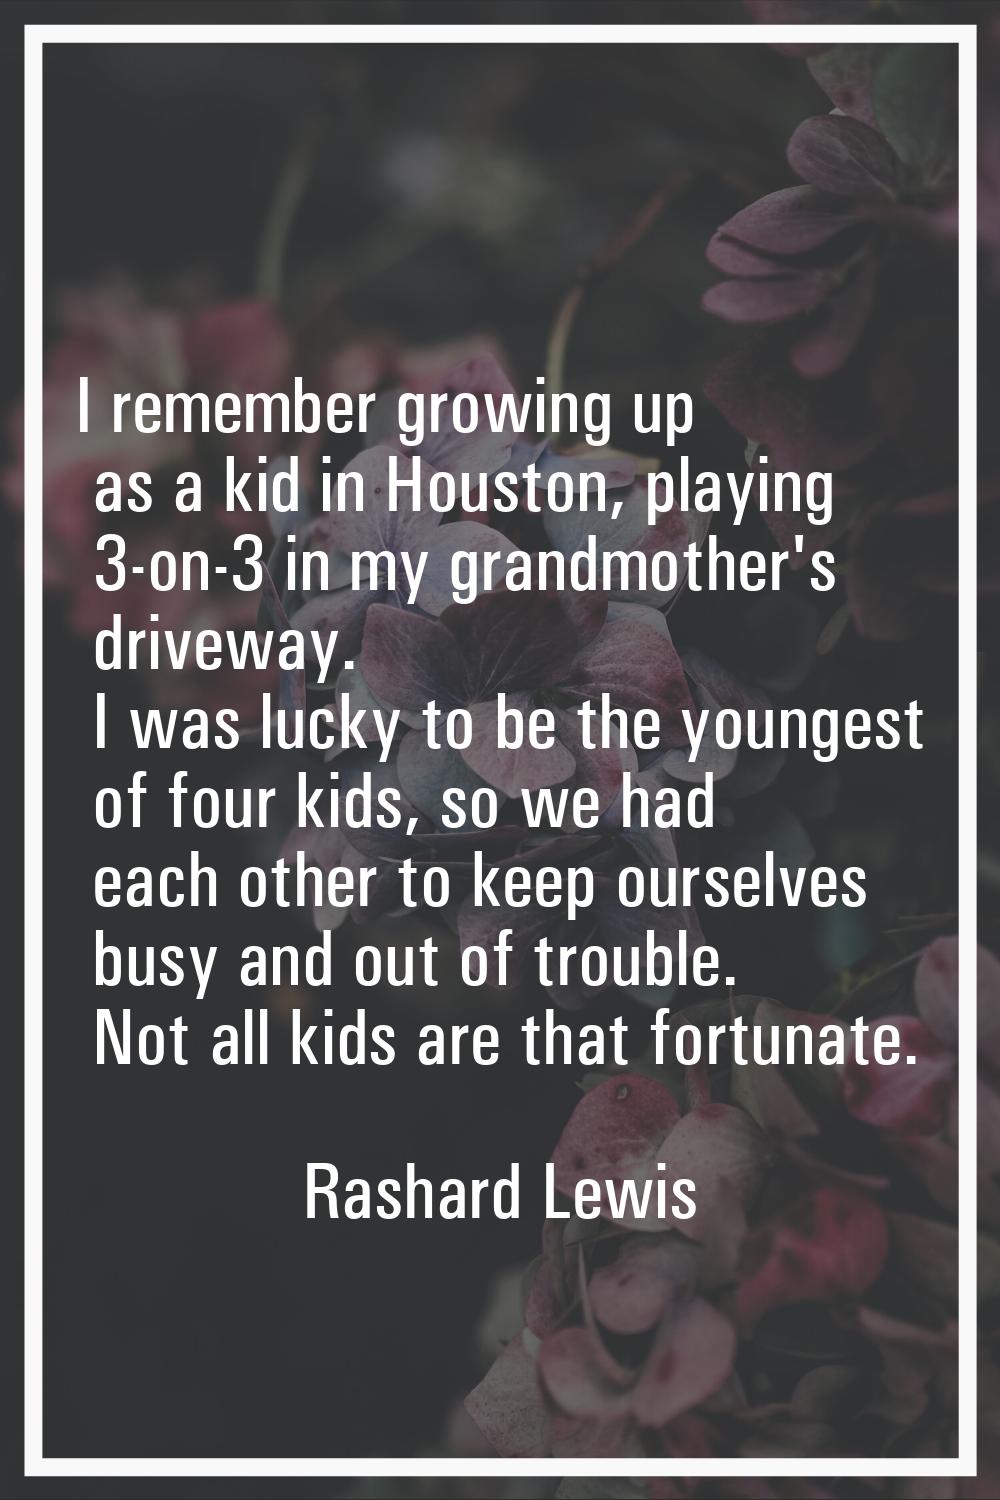 I remember growing up as a kid in Houston, playing 3-on-3 in my grandmother's driveway. I was lucky